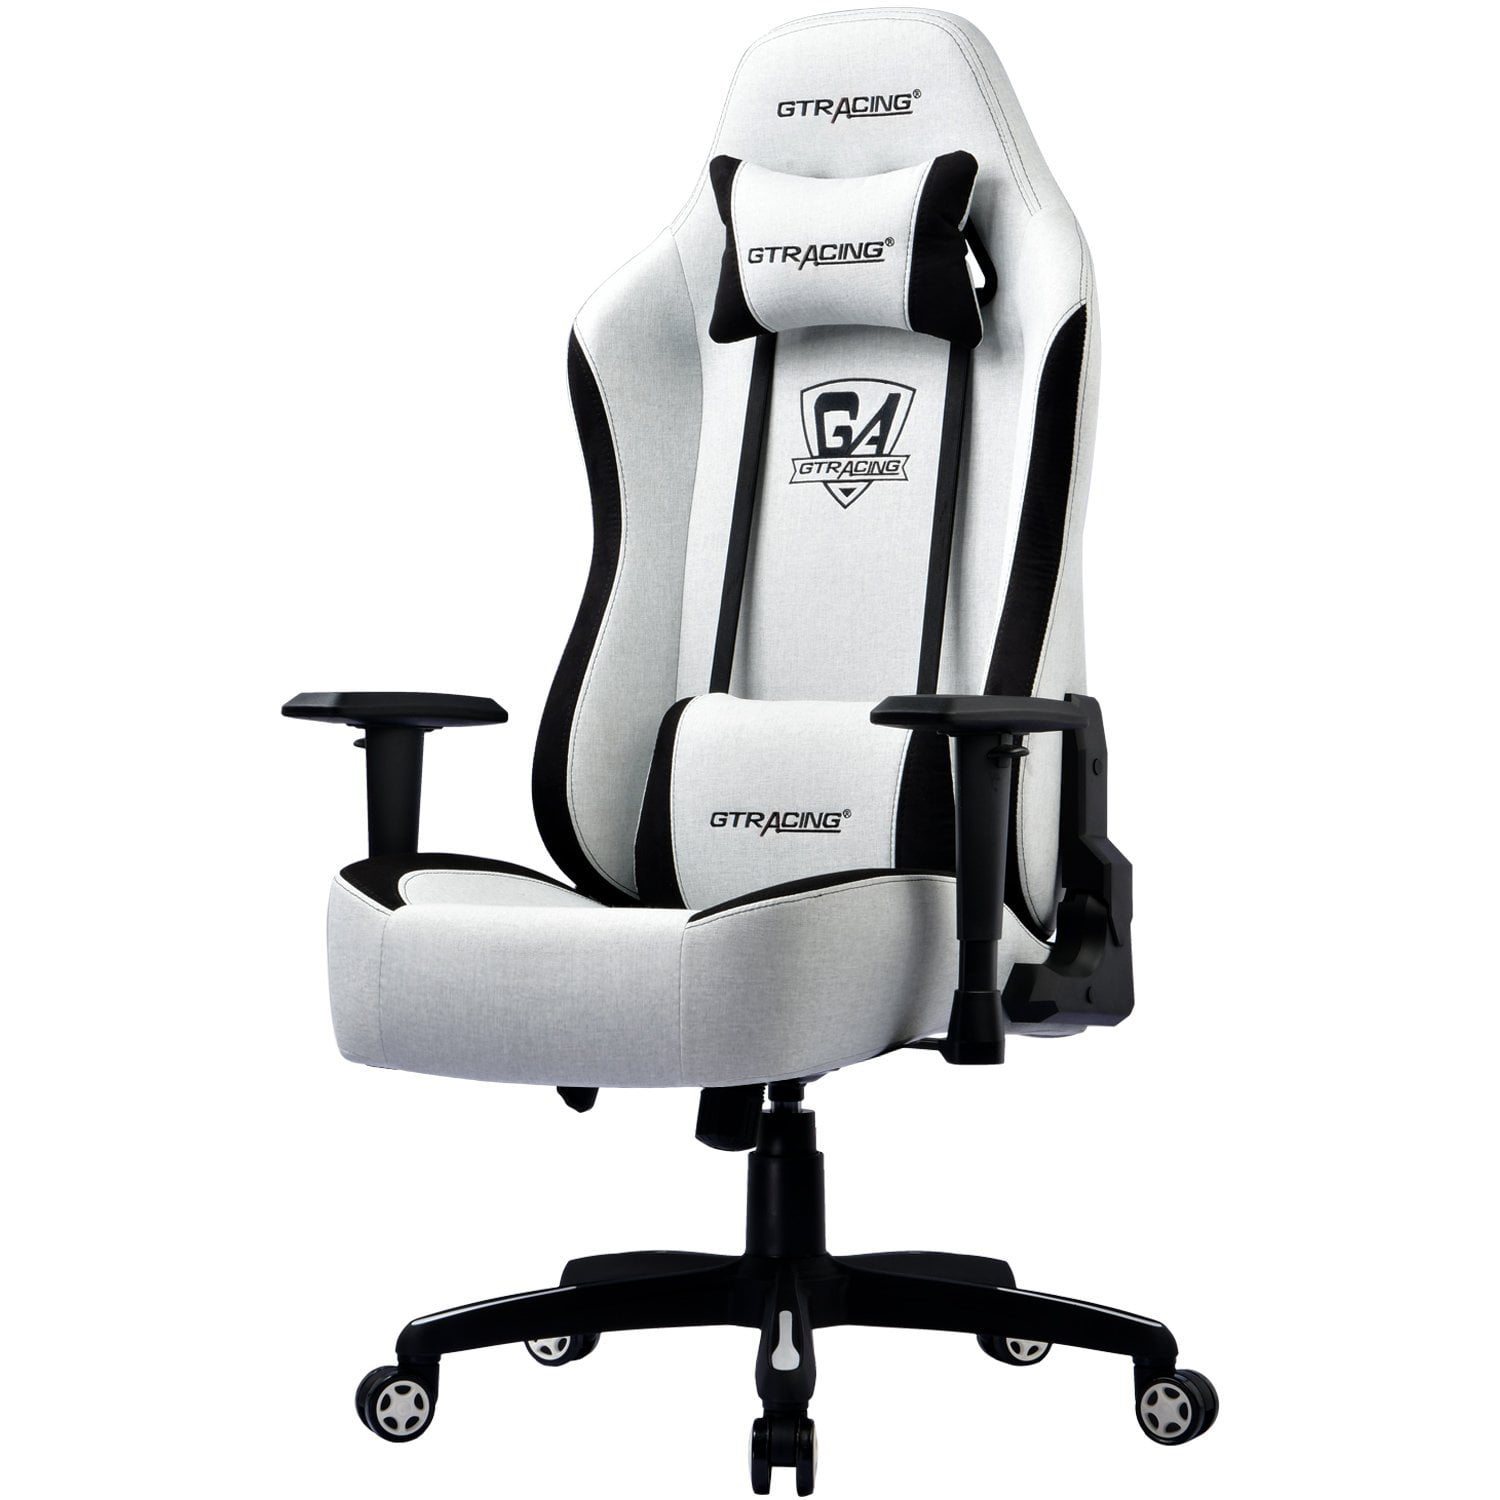  Gaming Chair Walmart White with Simple Decor